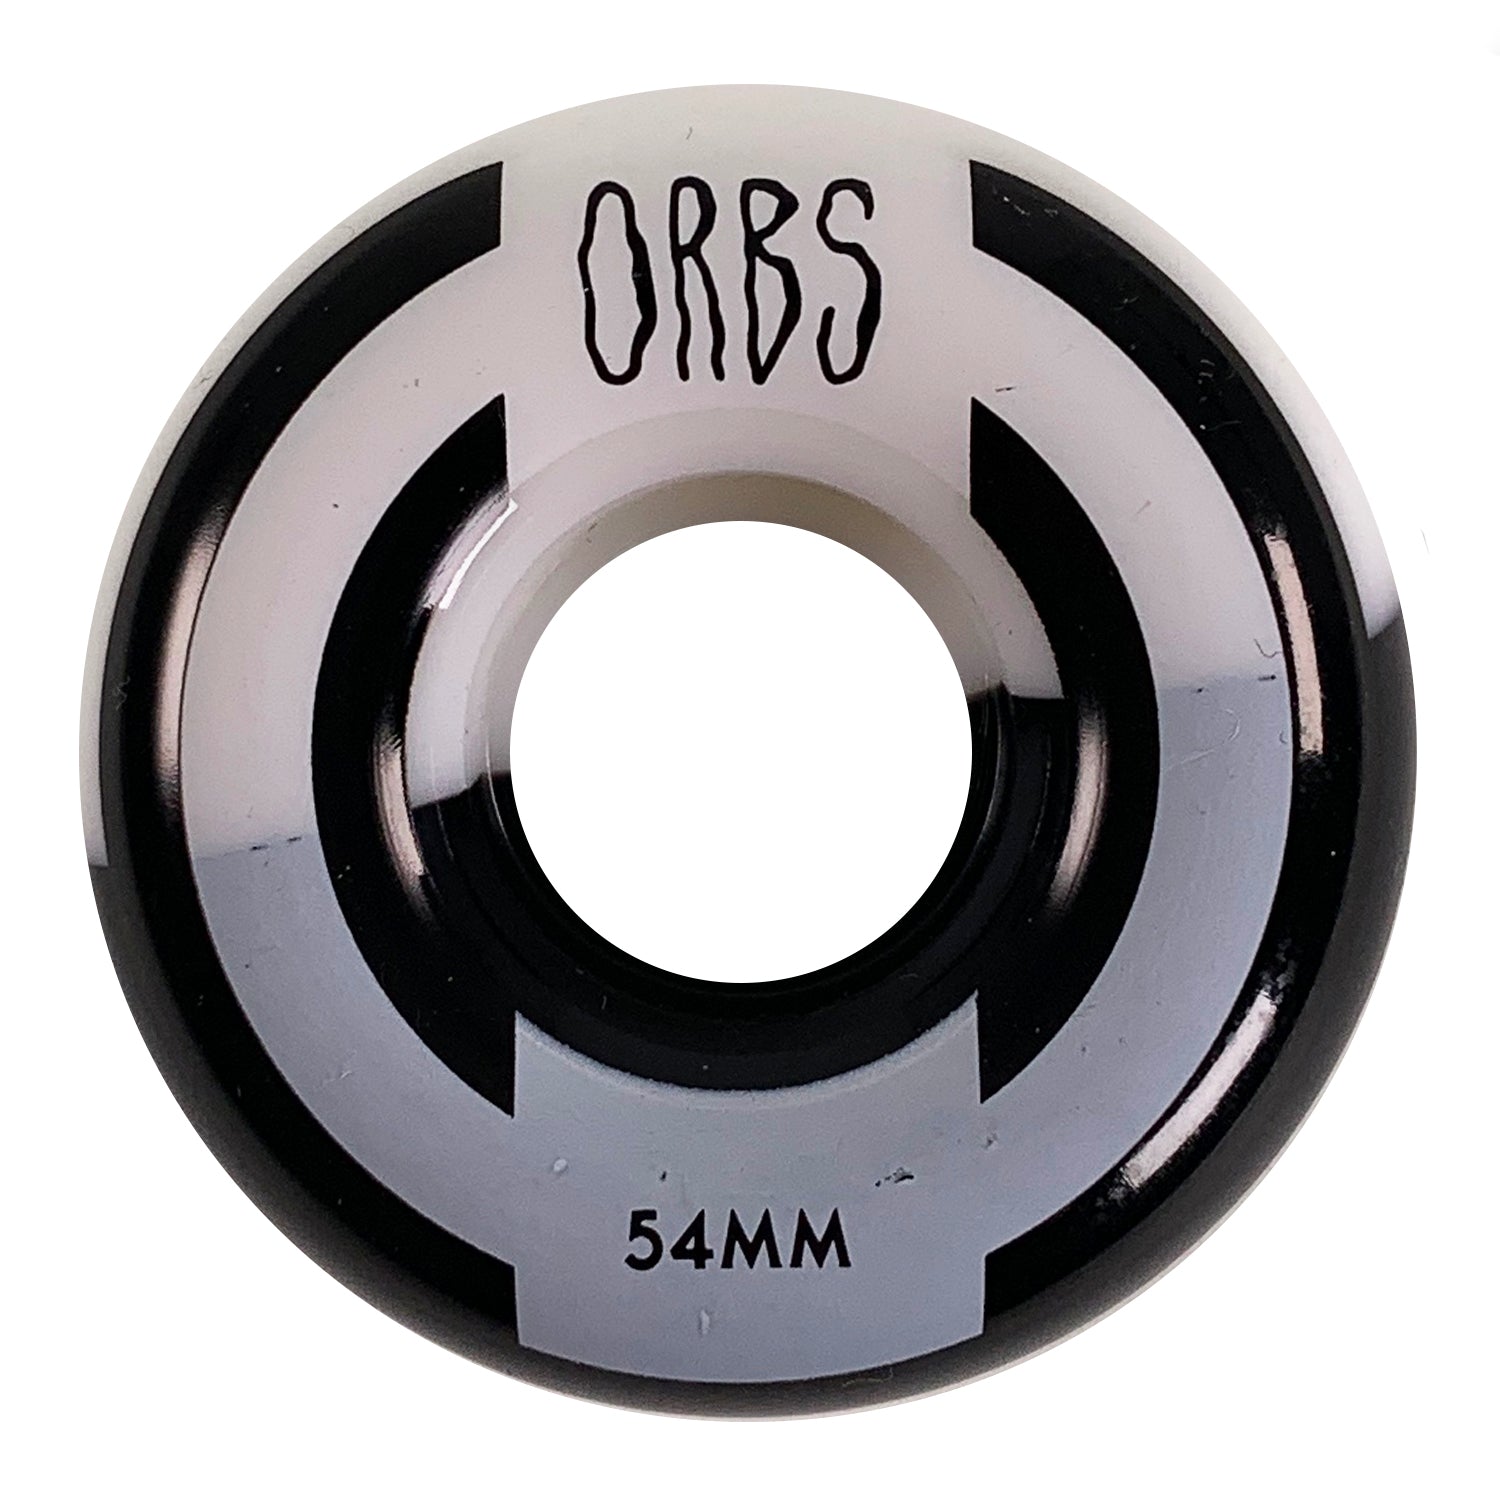 Orbs - 54mm - 99a - Apparitions Splits - Black/White - Prime Delux Store